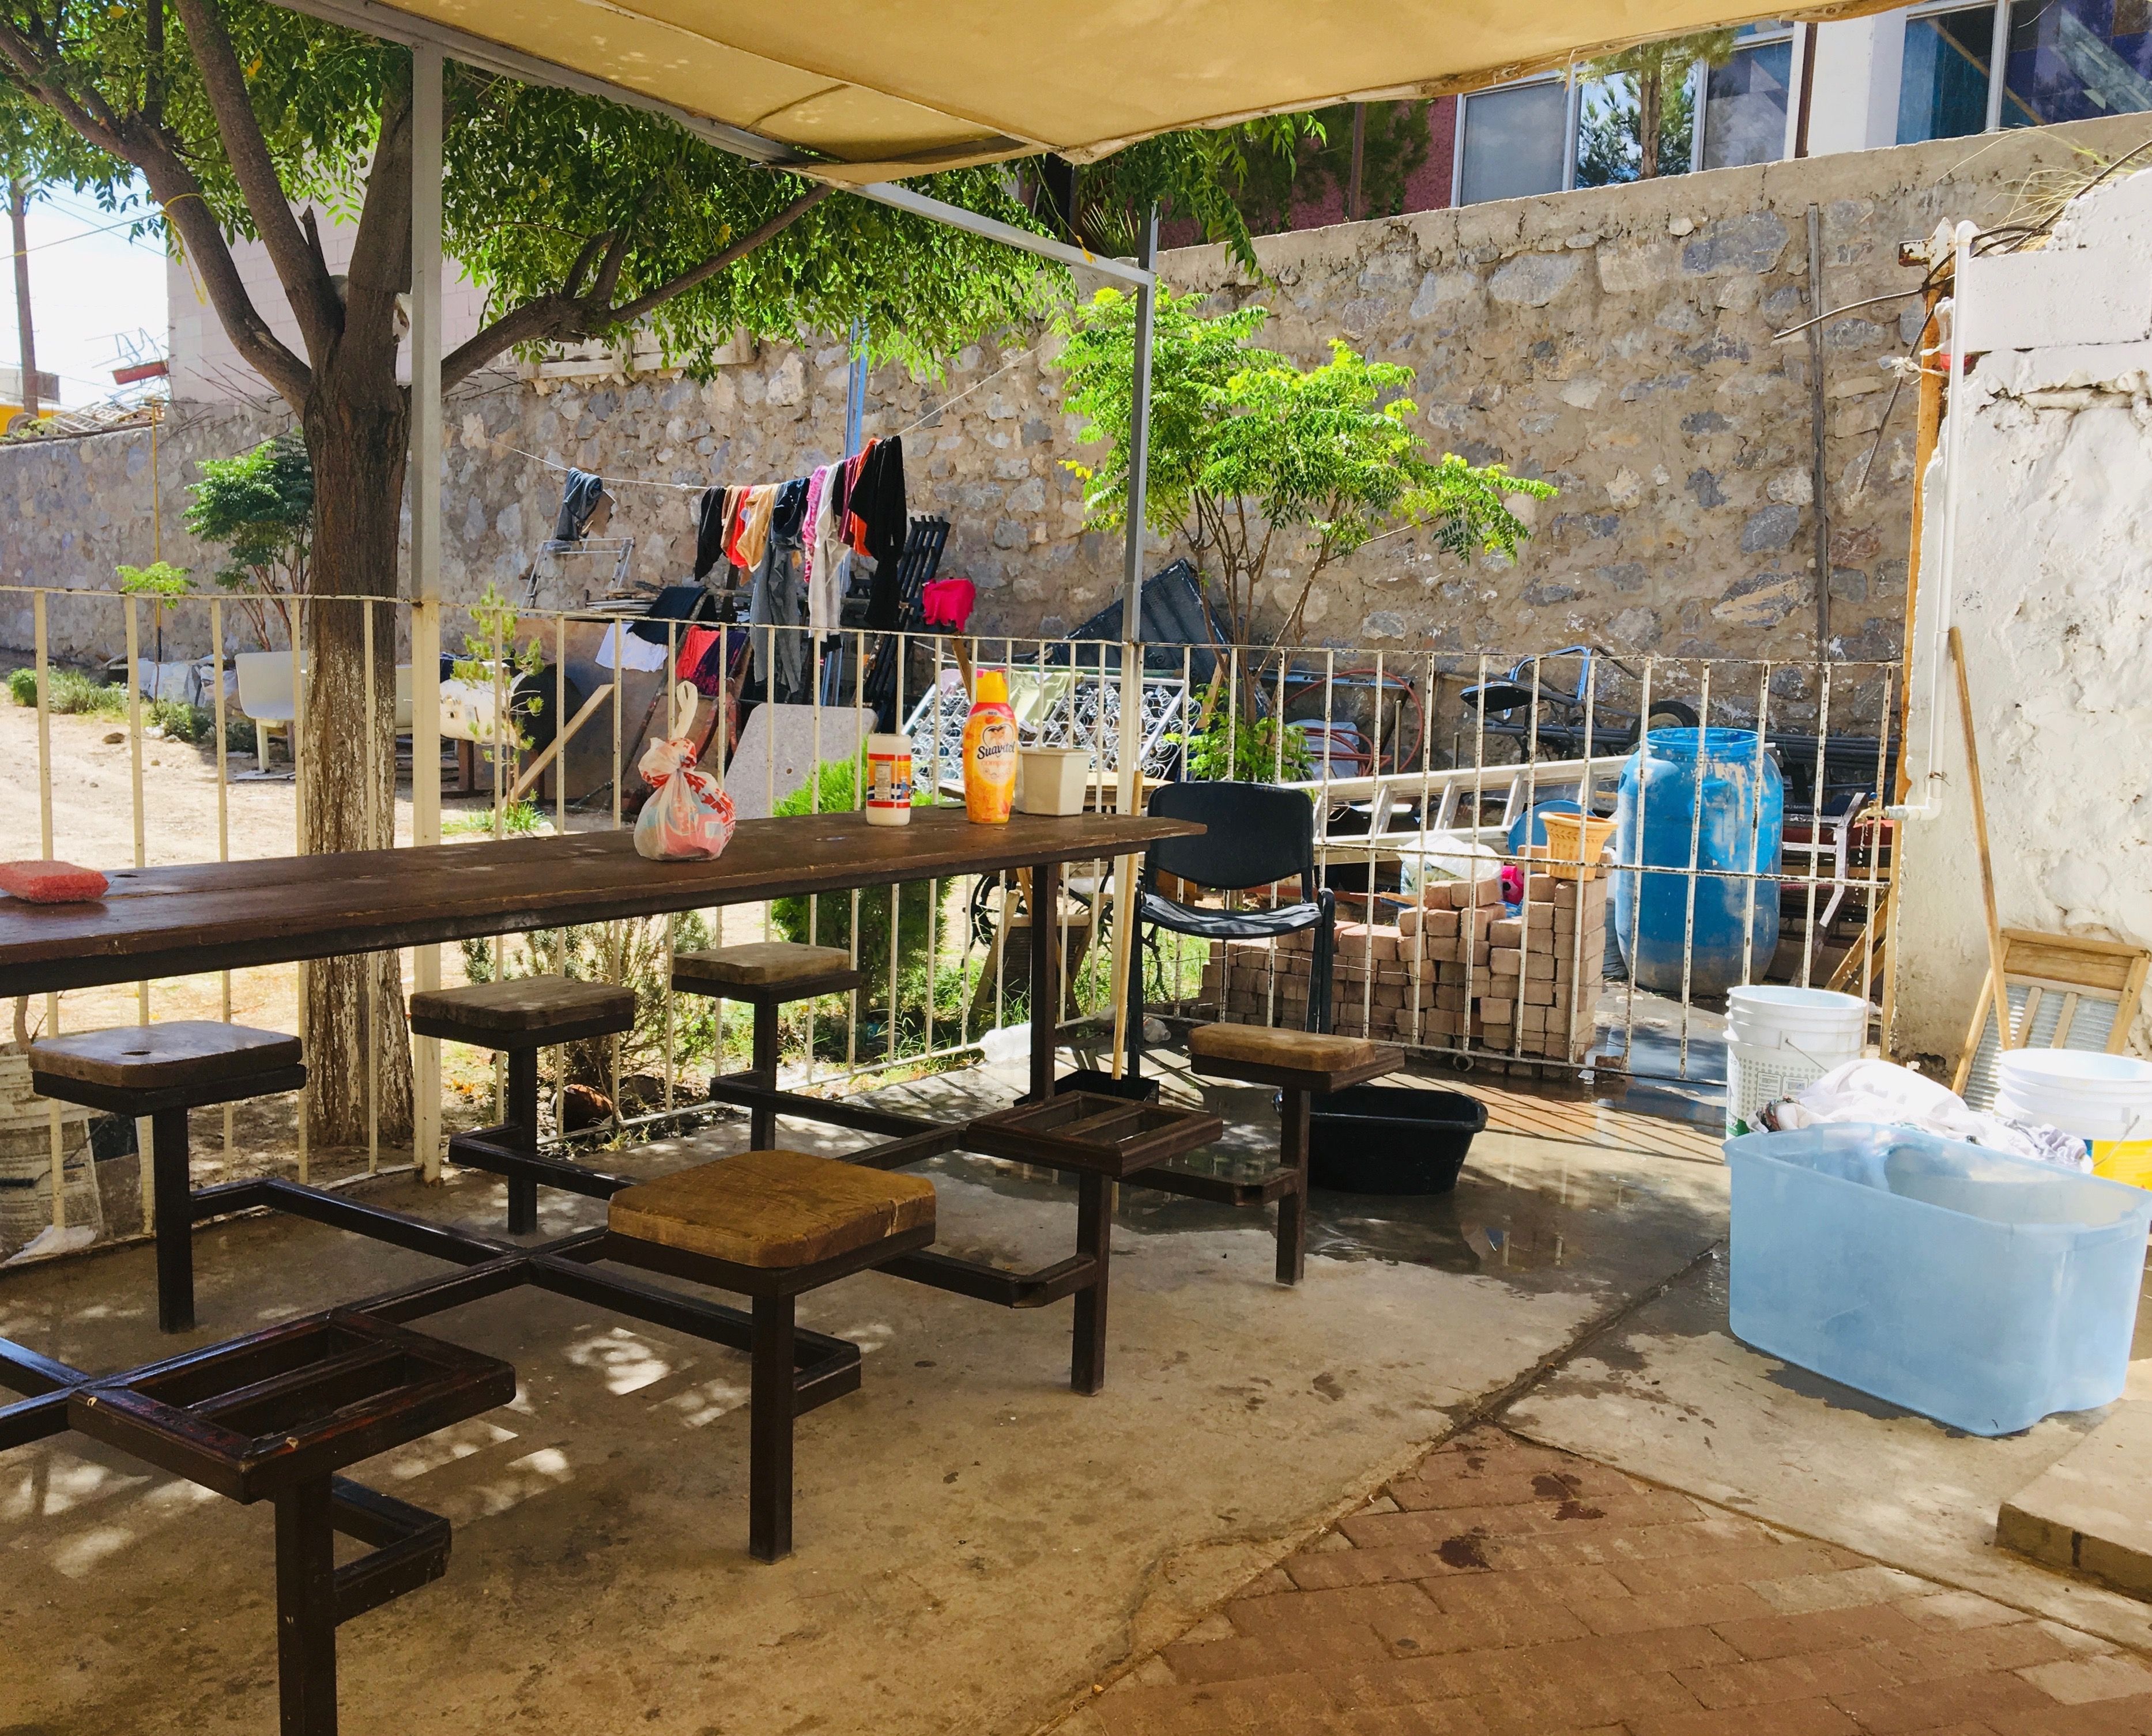 The patio outside a shelter in Ciudad Juárez. Migrants from Central America and Cuba gather here to socialize and wash their clothes at the outdoor spigot. Image by Lily Moore-Eissenberg. Mexico, 2019.